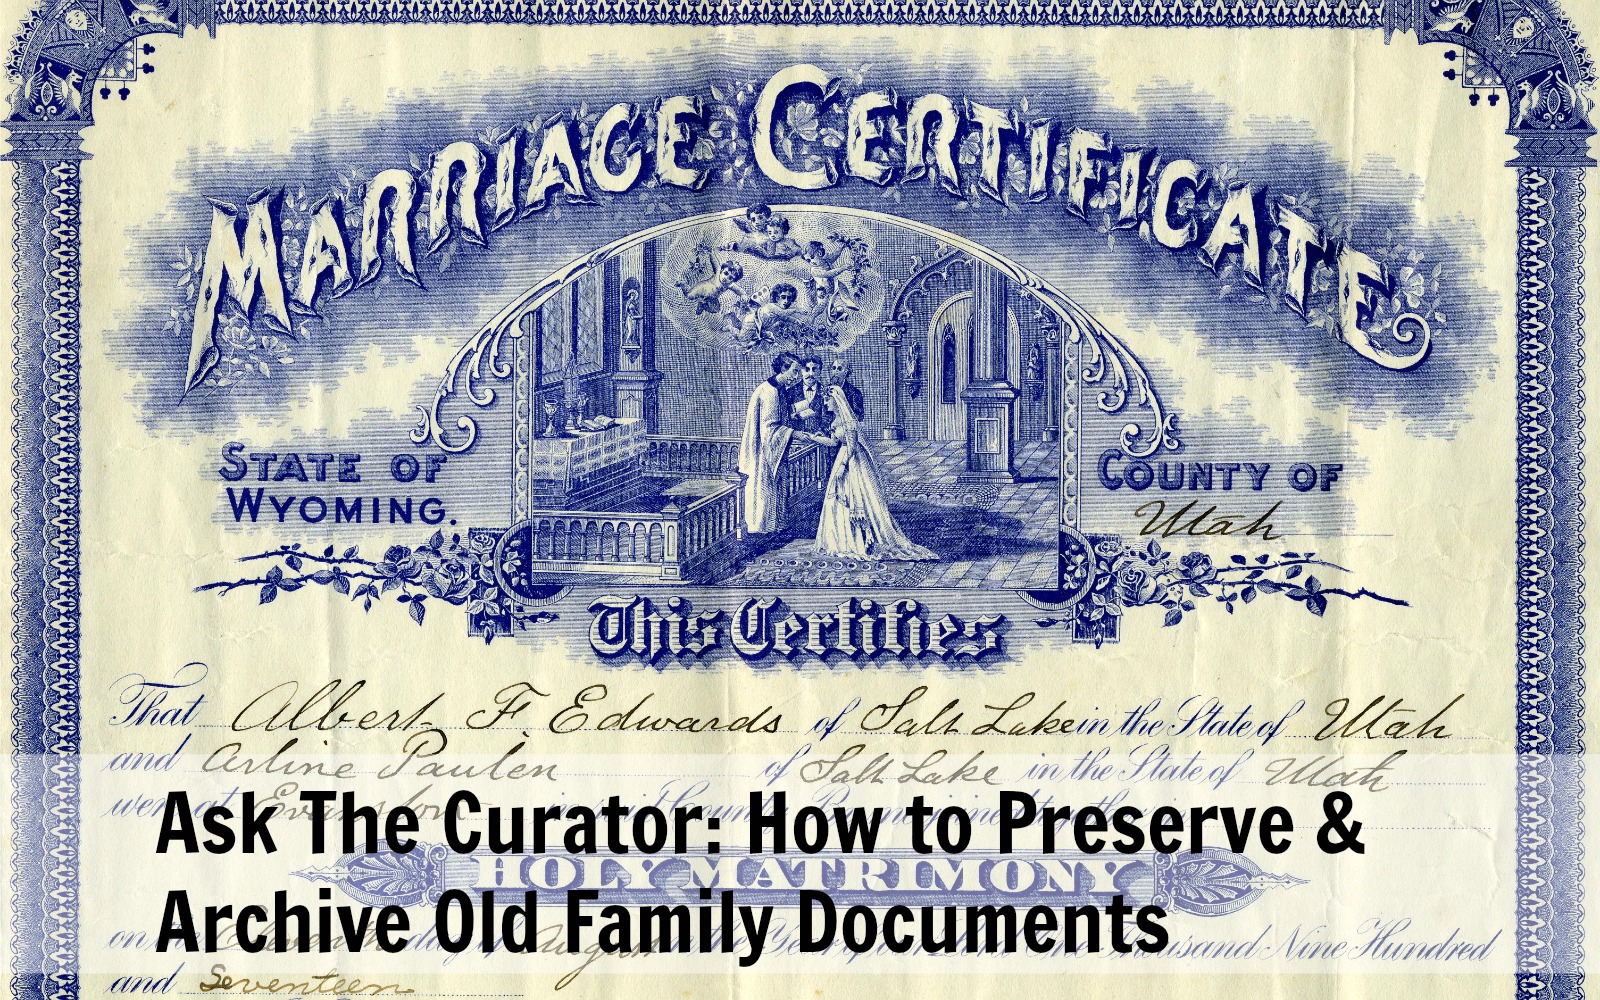 Preserve old family documents